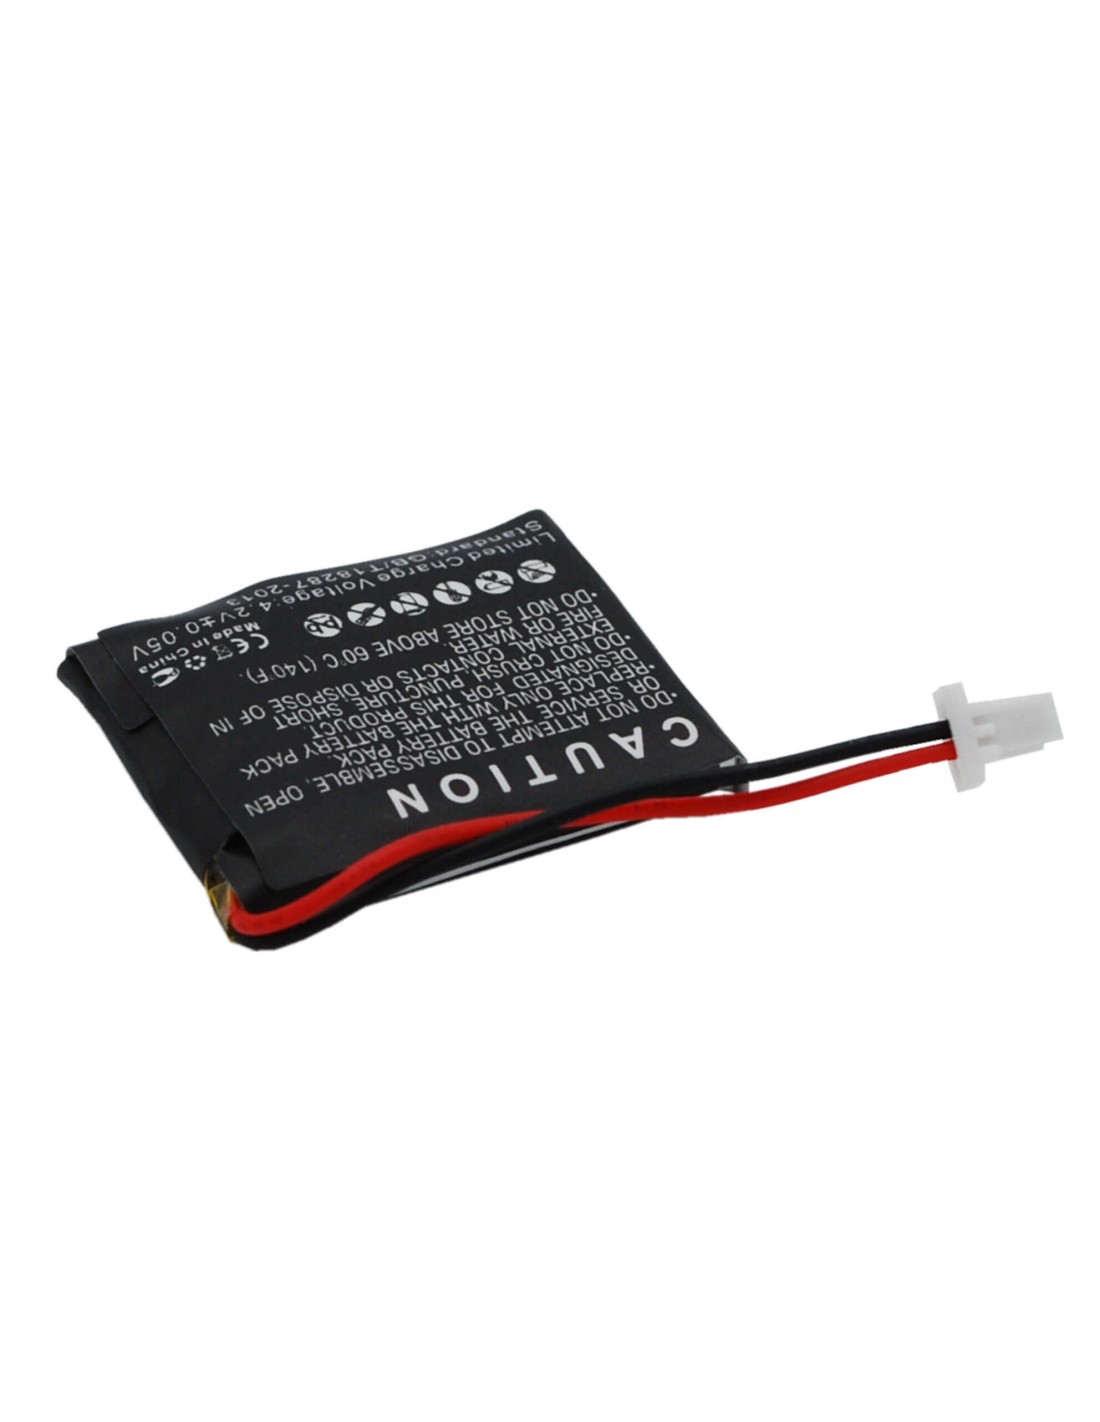 Battery for Nokia Hs-21w 3.7V, 150mAh - 0.56Wh